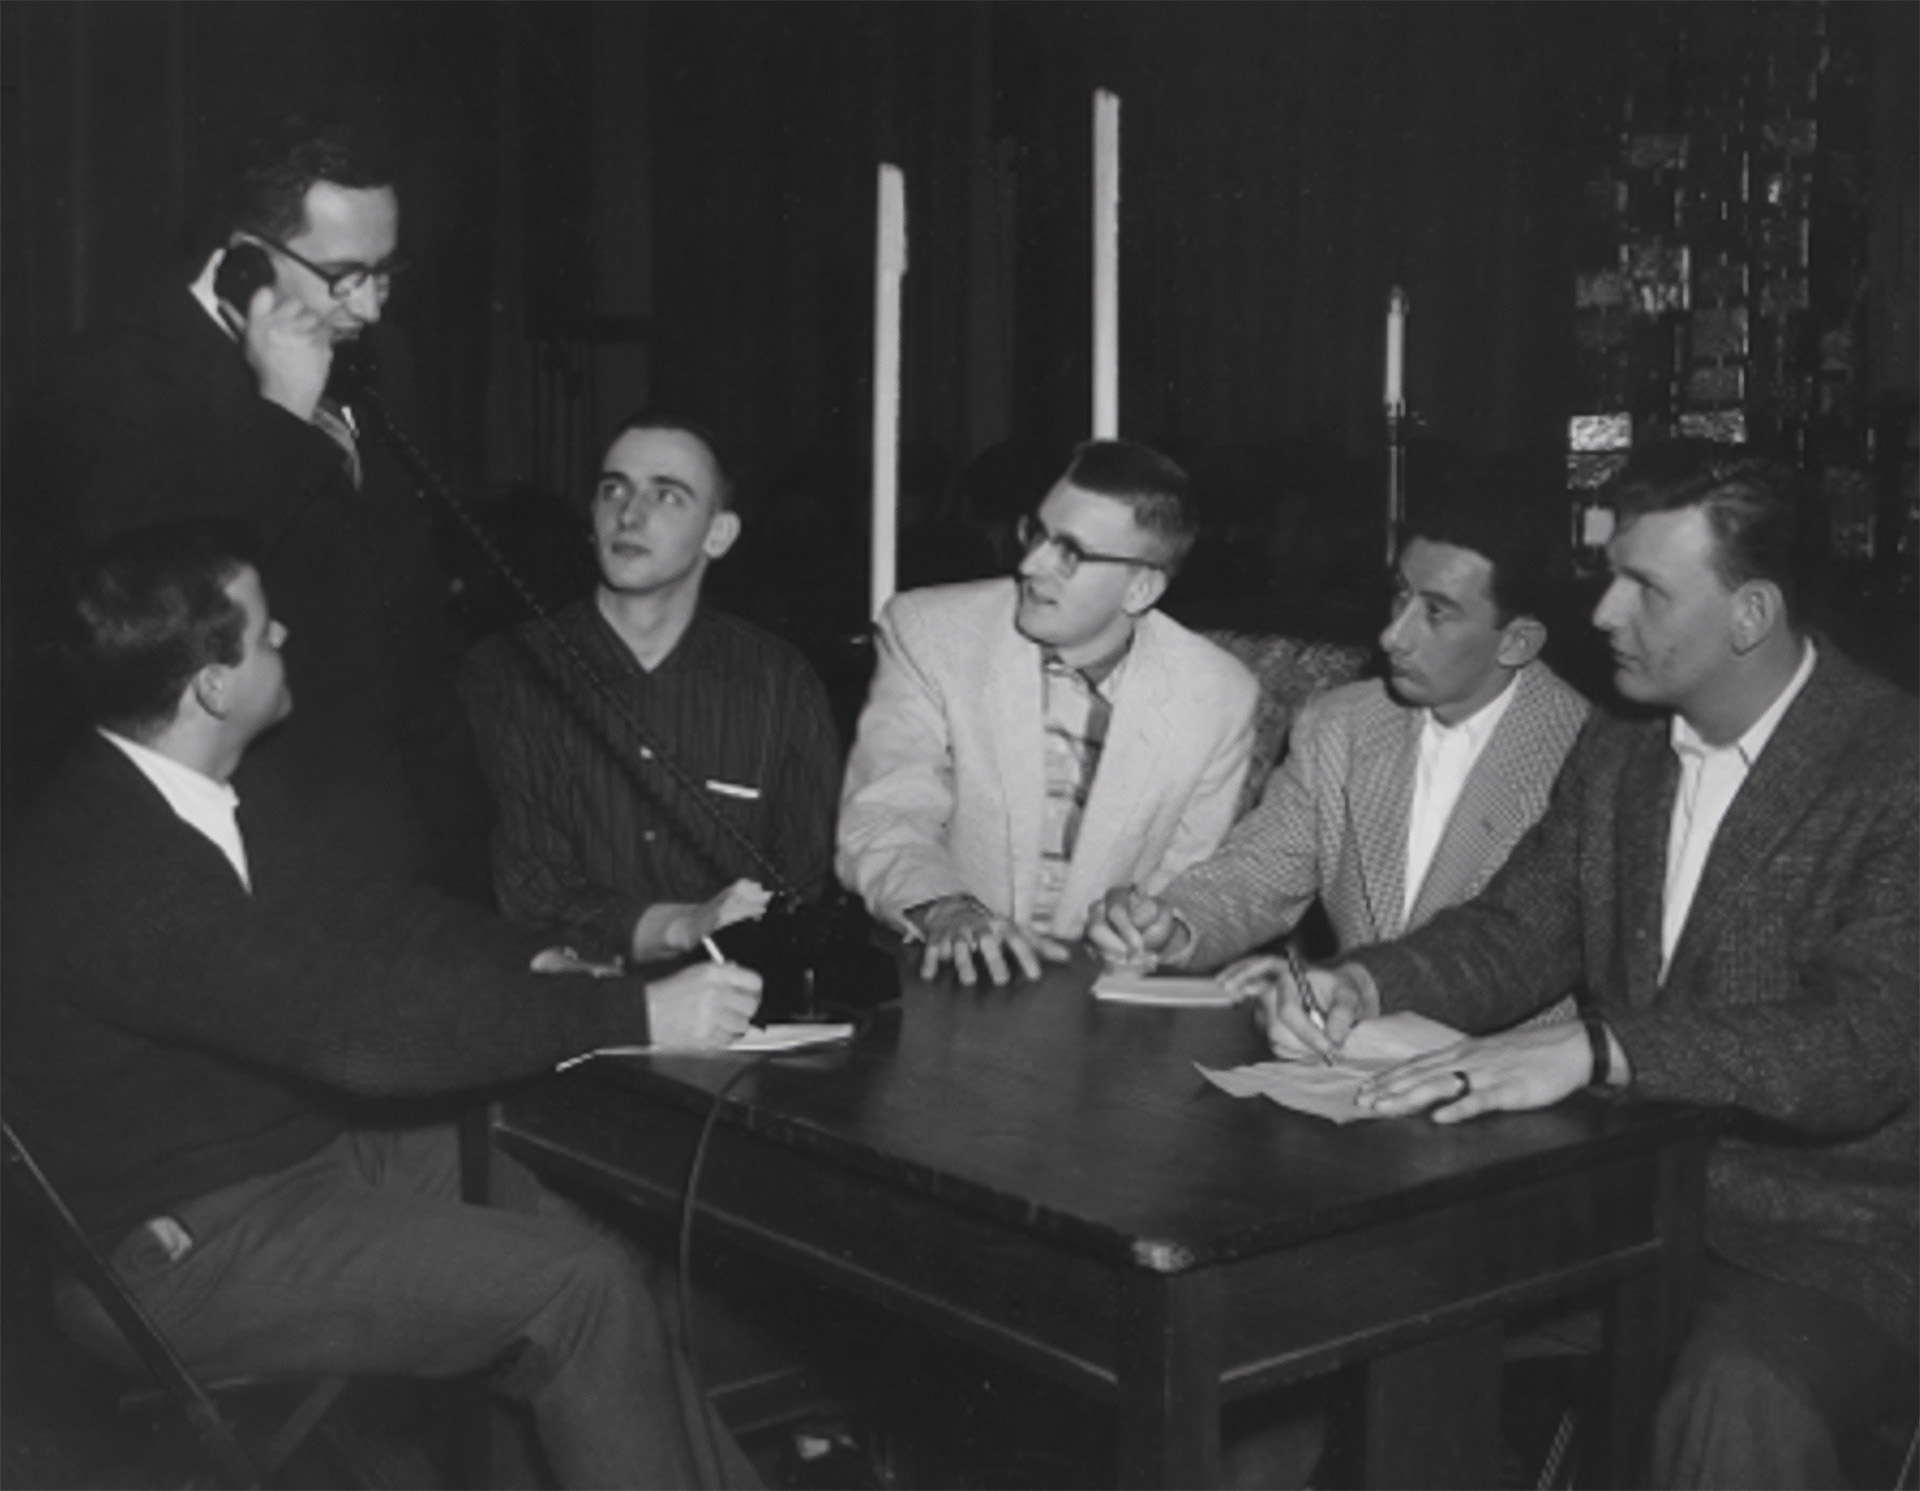 The Naperville Community Council appointed a Human Relations Study Group in 1964 “to study the organization and duties of a formal or informal human relations group and the advantages and disadvantages of such a group in Naperville.”